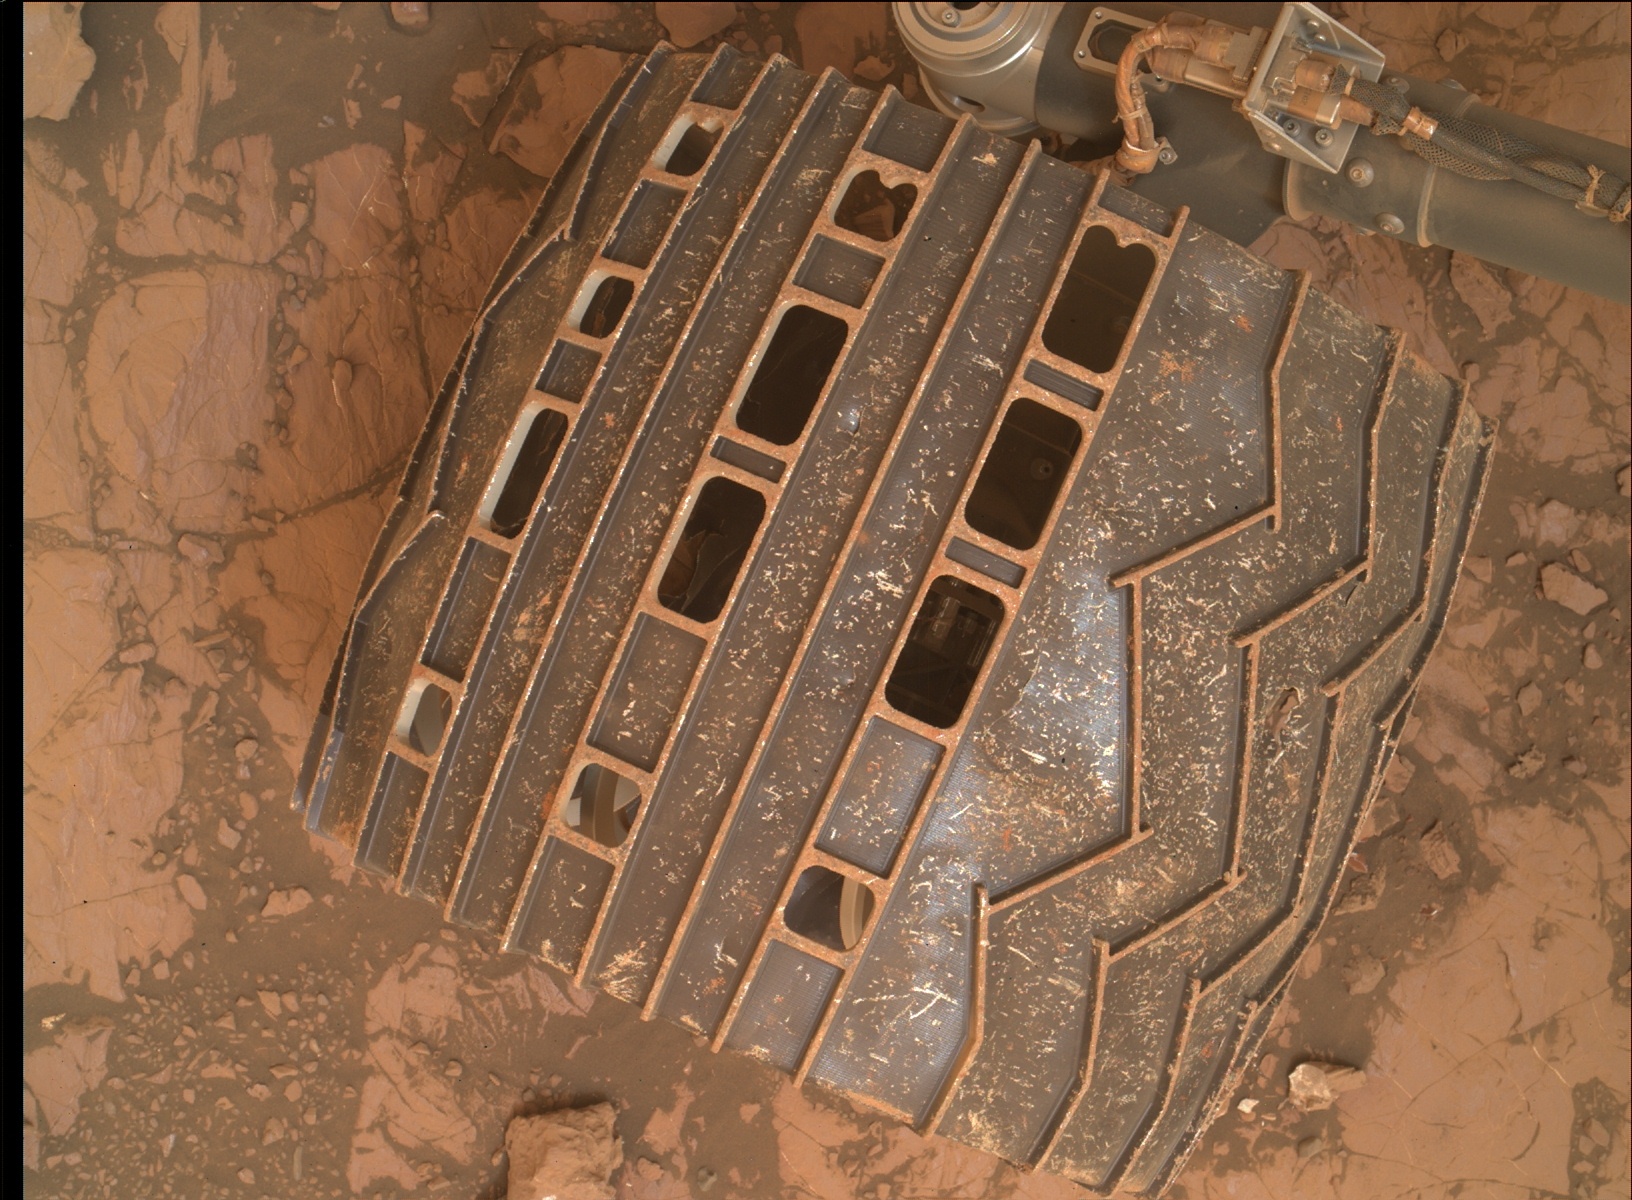 Nasa's Mars rover Curiosity acquired this image using its Mars Hand Lens Imager (MAHLI) on Sol 2115